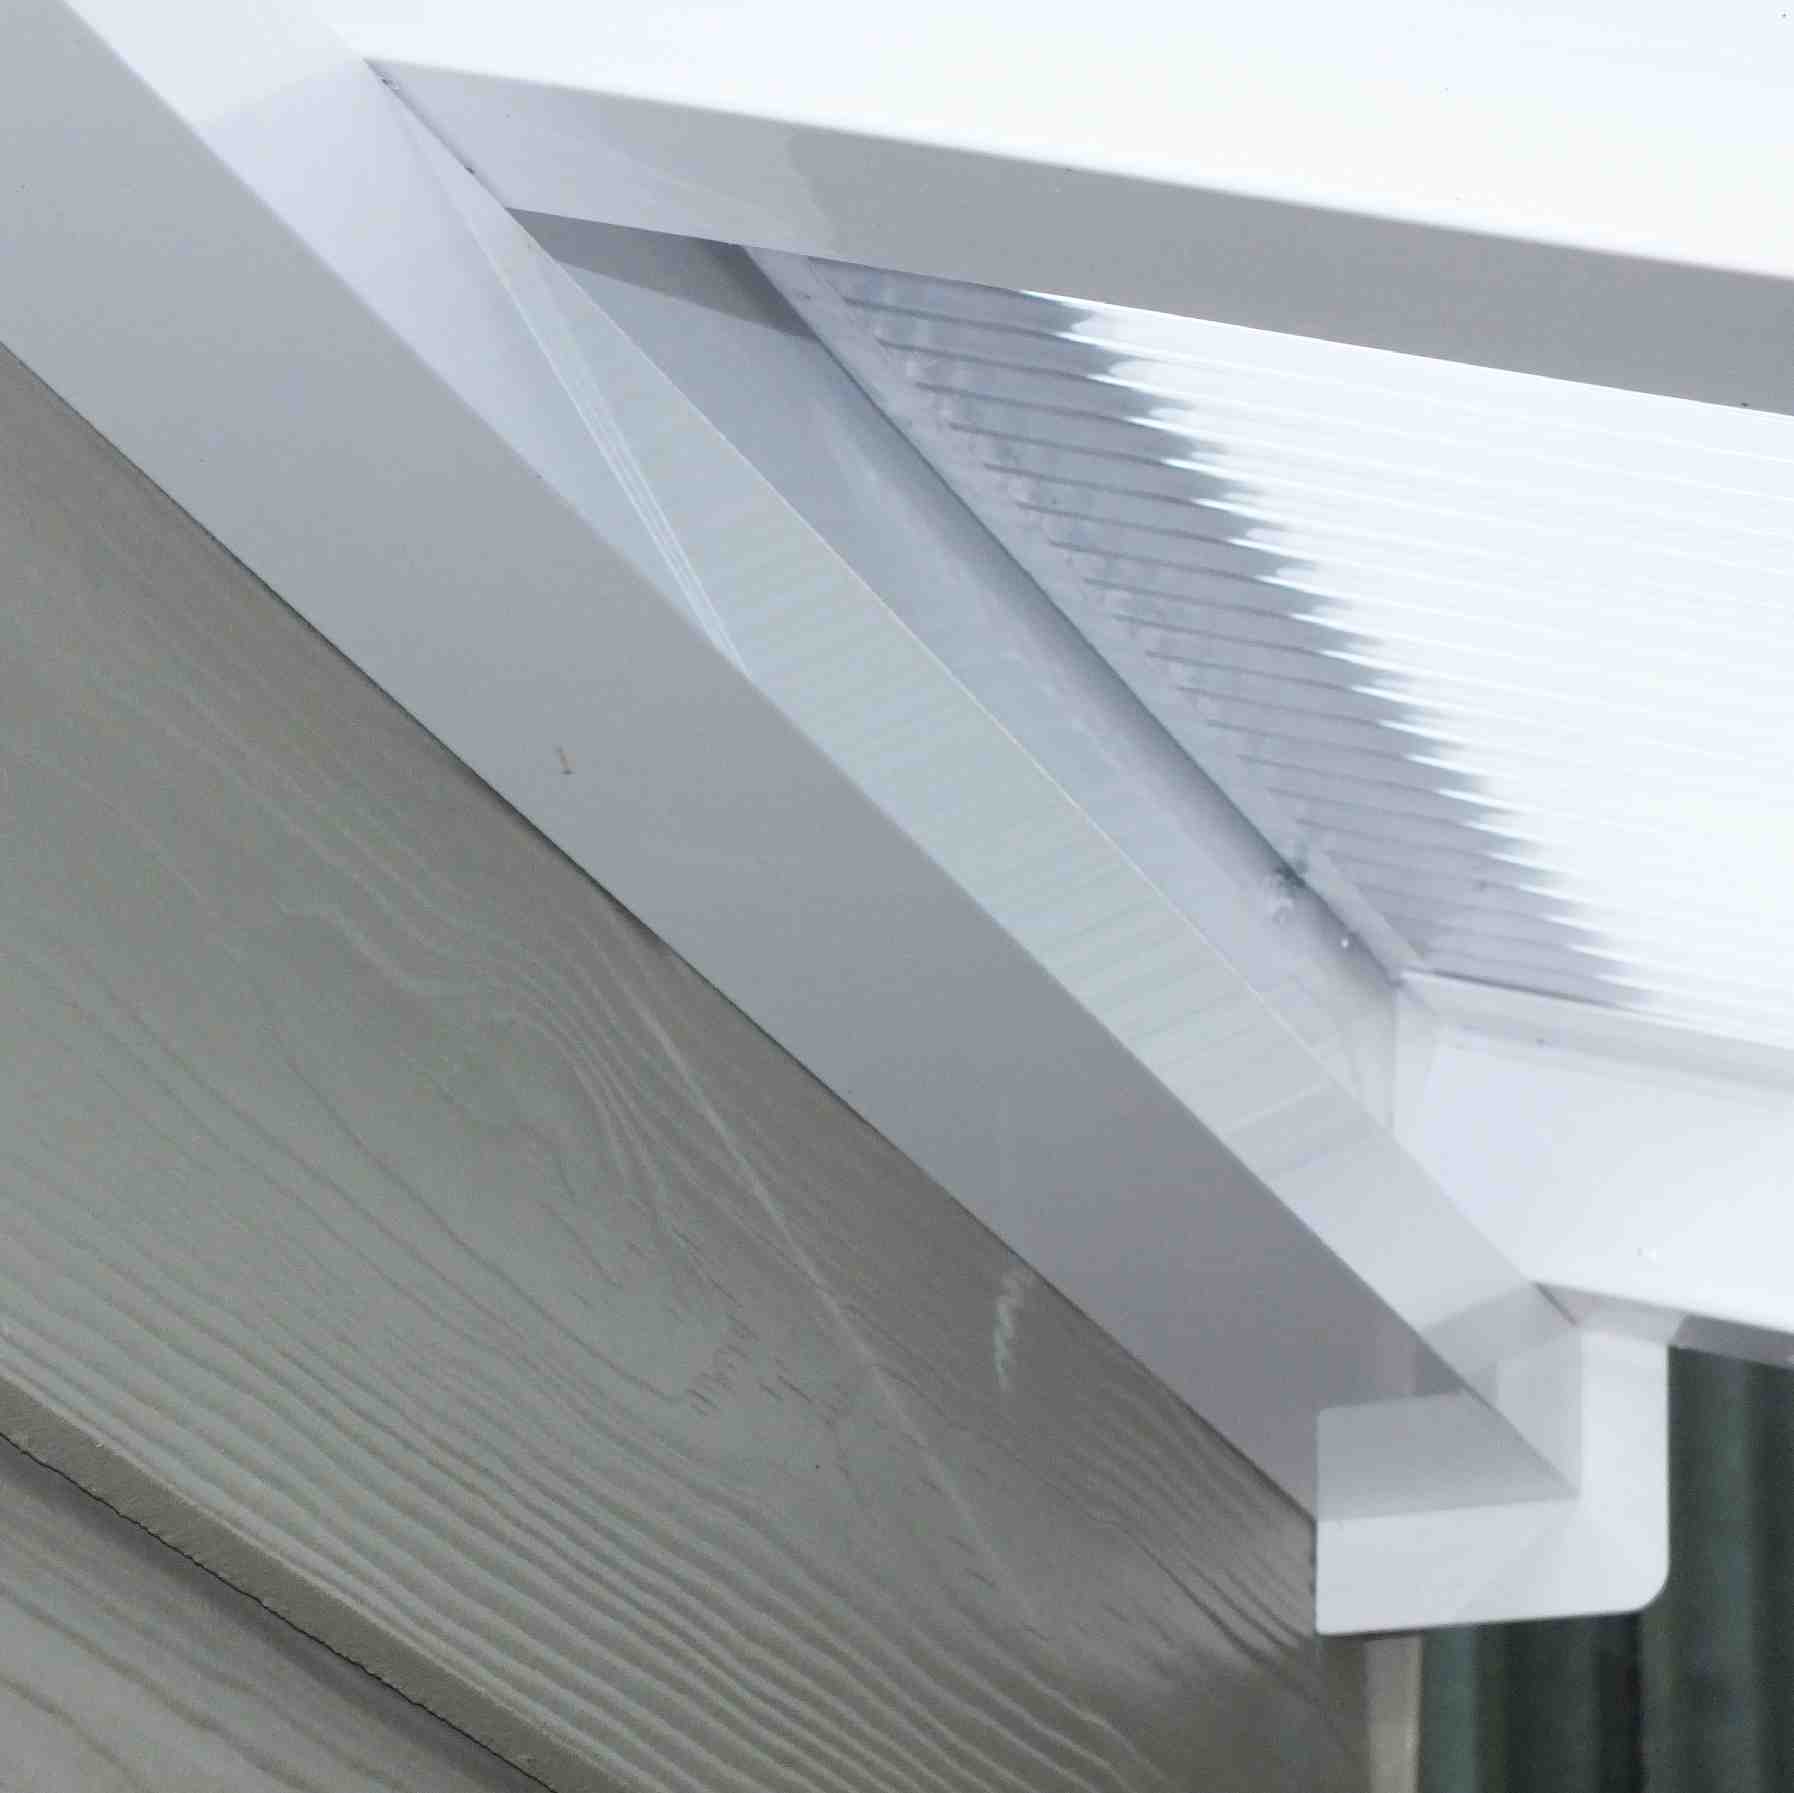 Great deals on Omega Verandah White with 16mm Polycarbonate Glazing - 3.1m (W) x 1.5m (P), (2) Supporting Posts